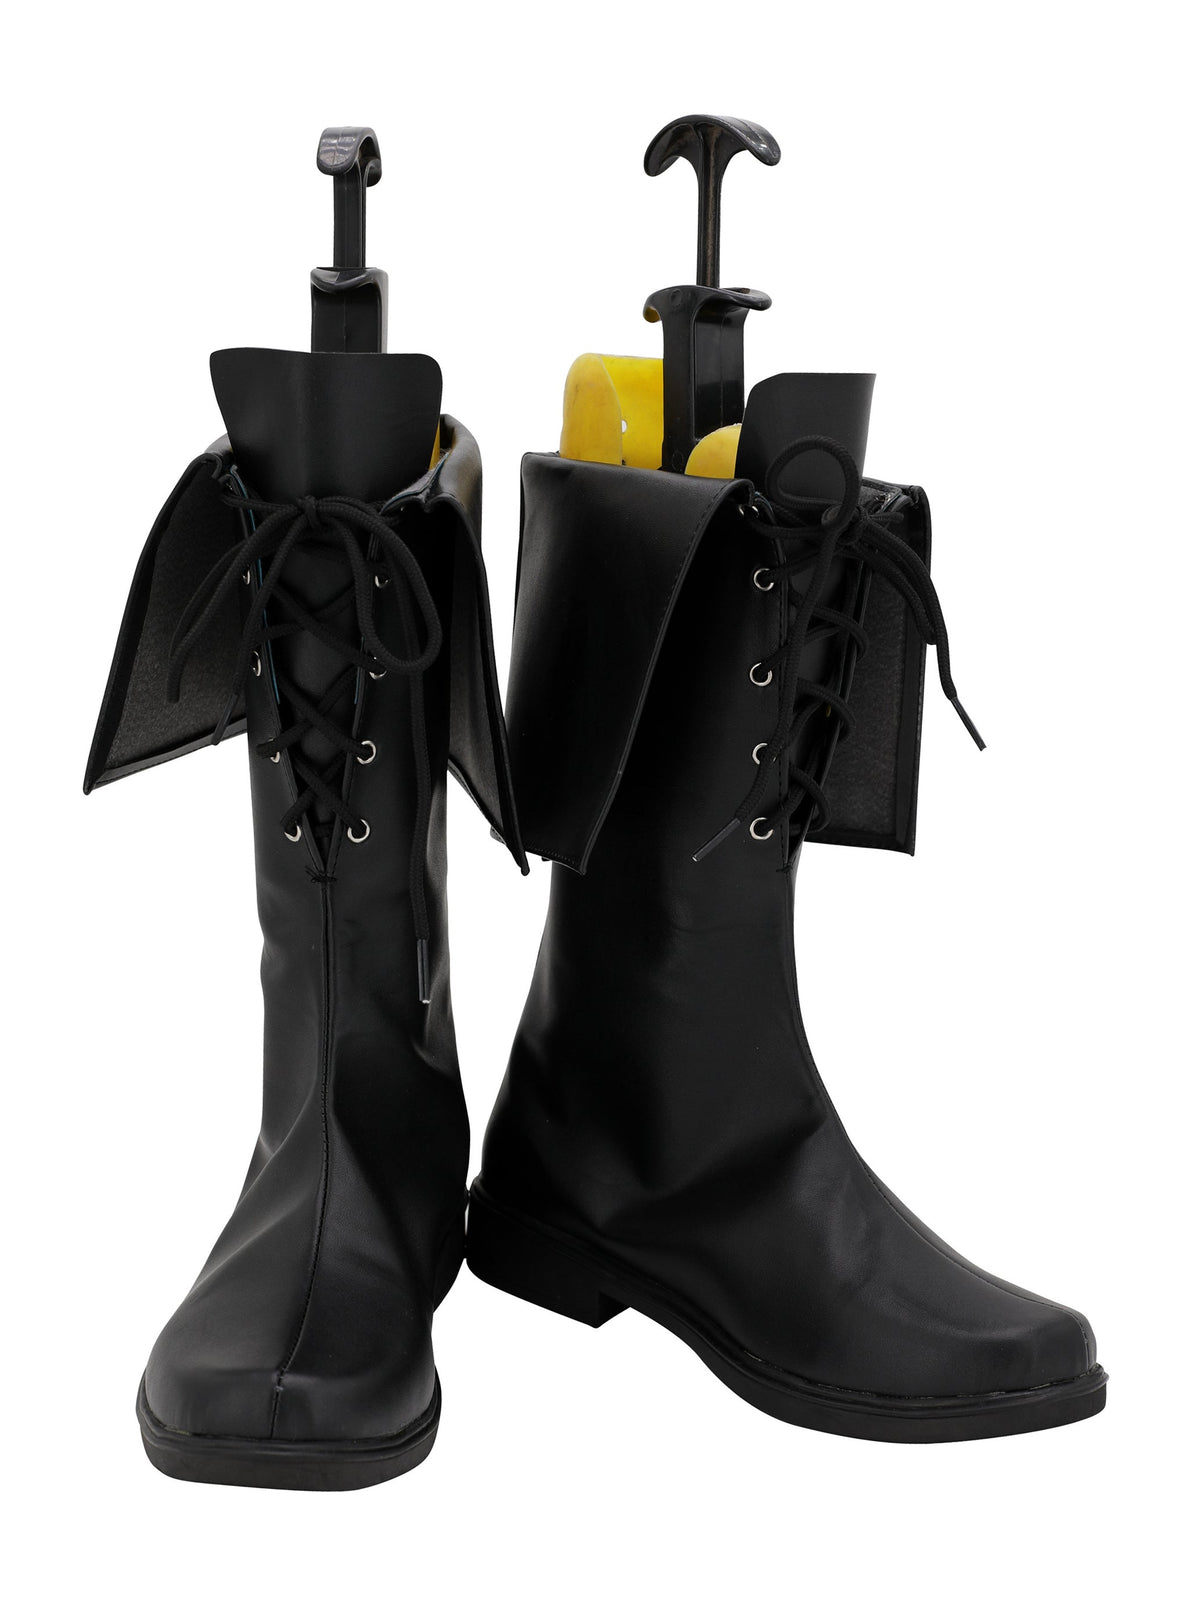 Final Fantasy XIV Thancred Cosplay Shoes